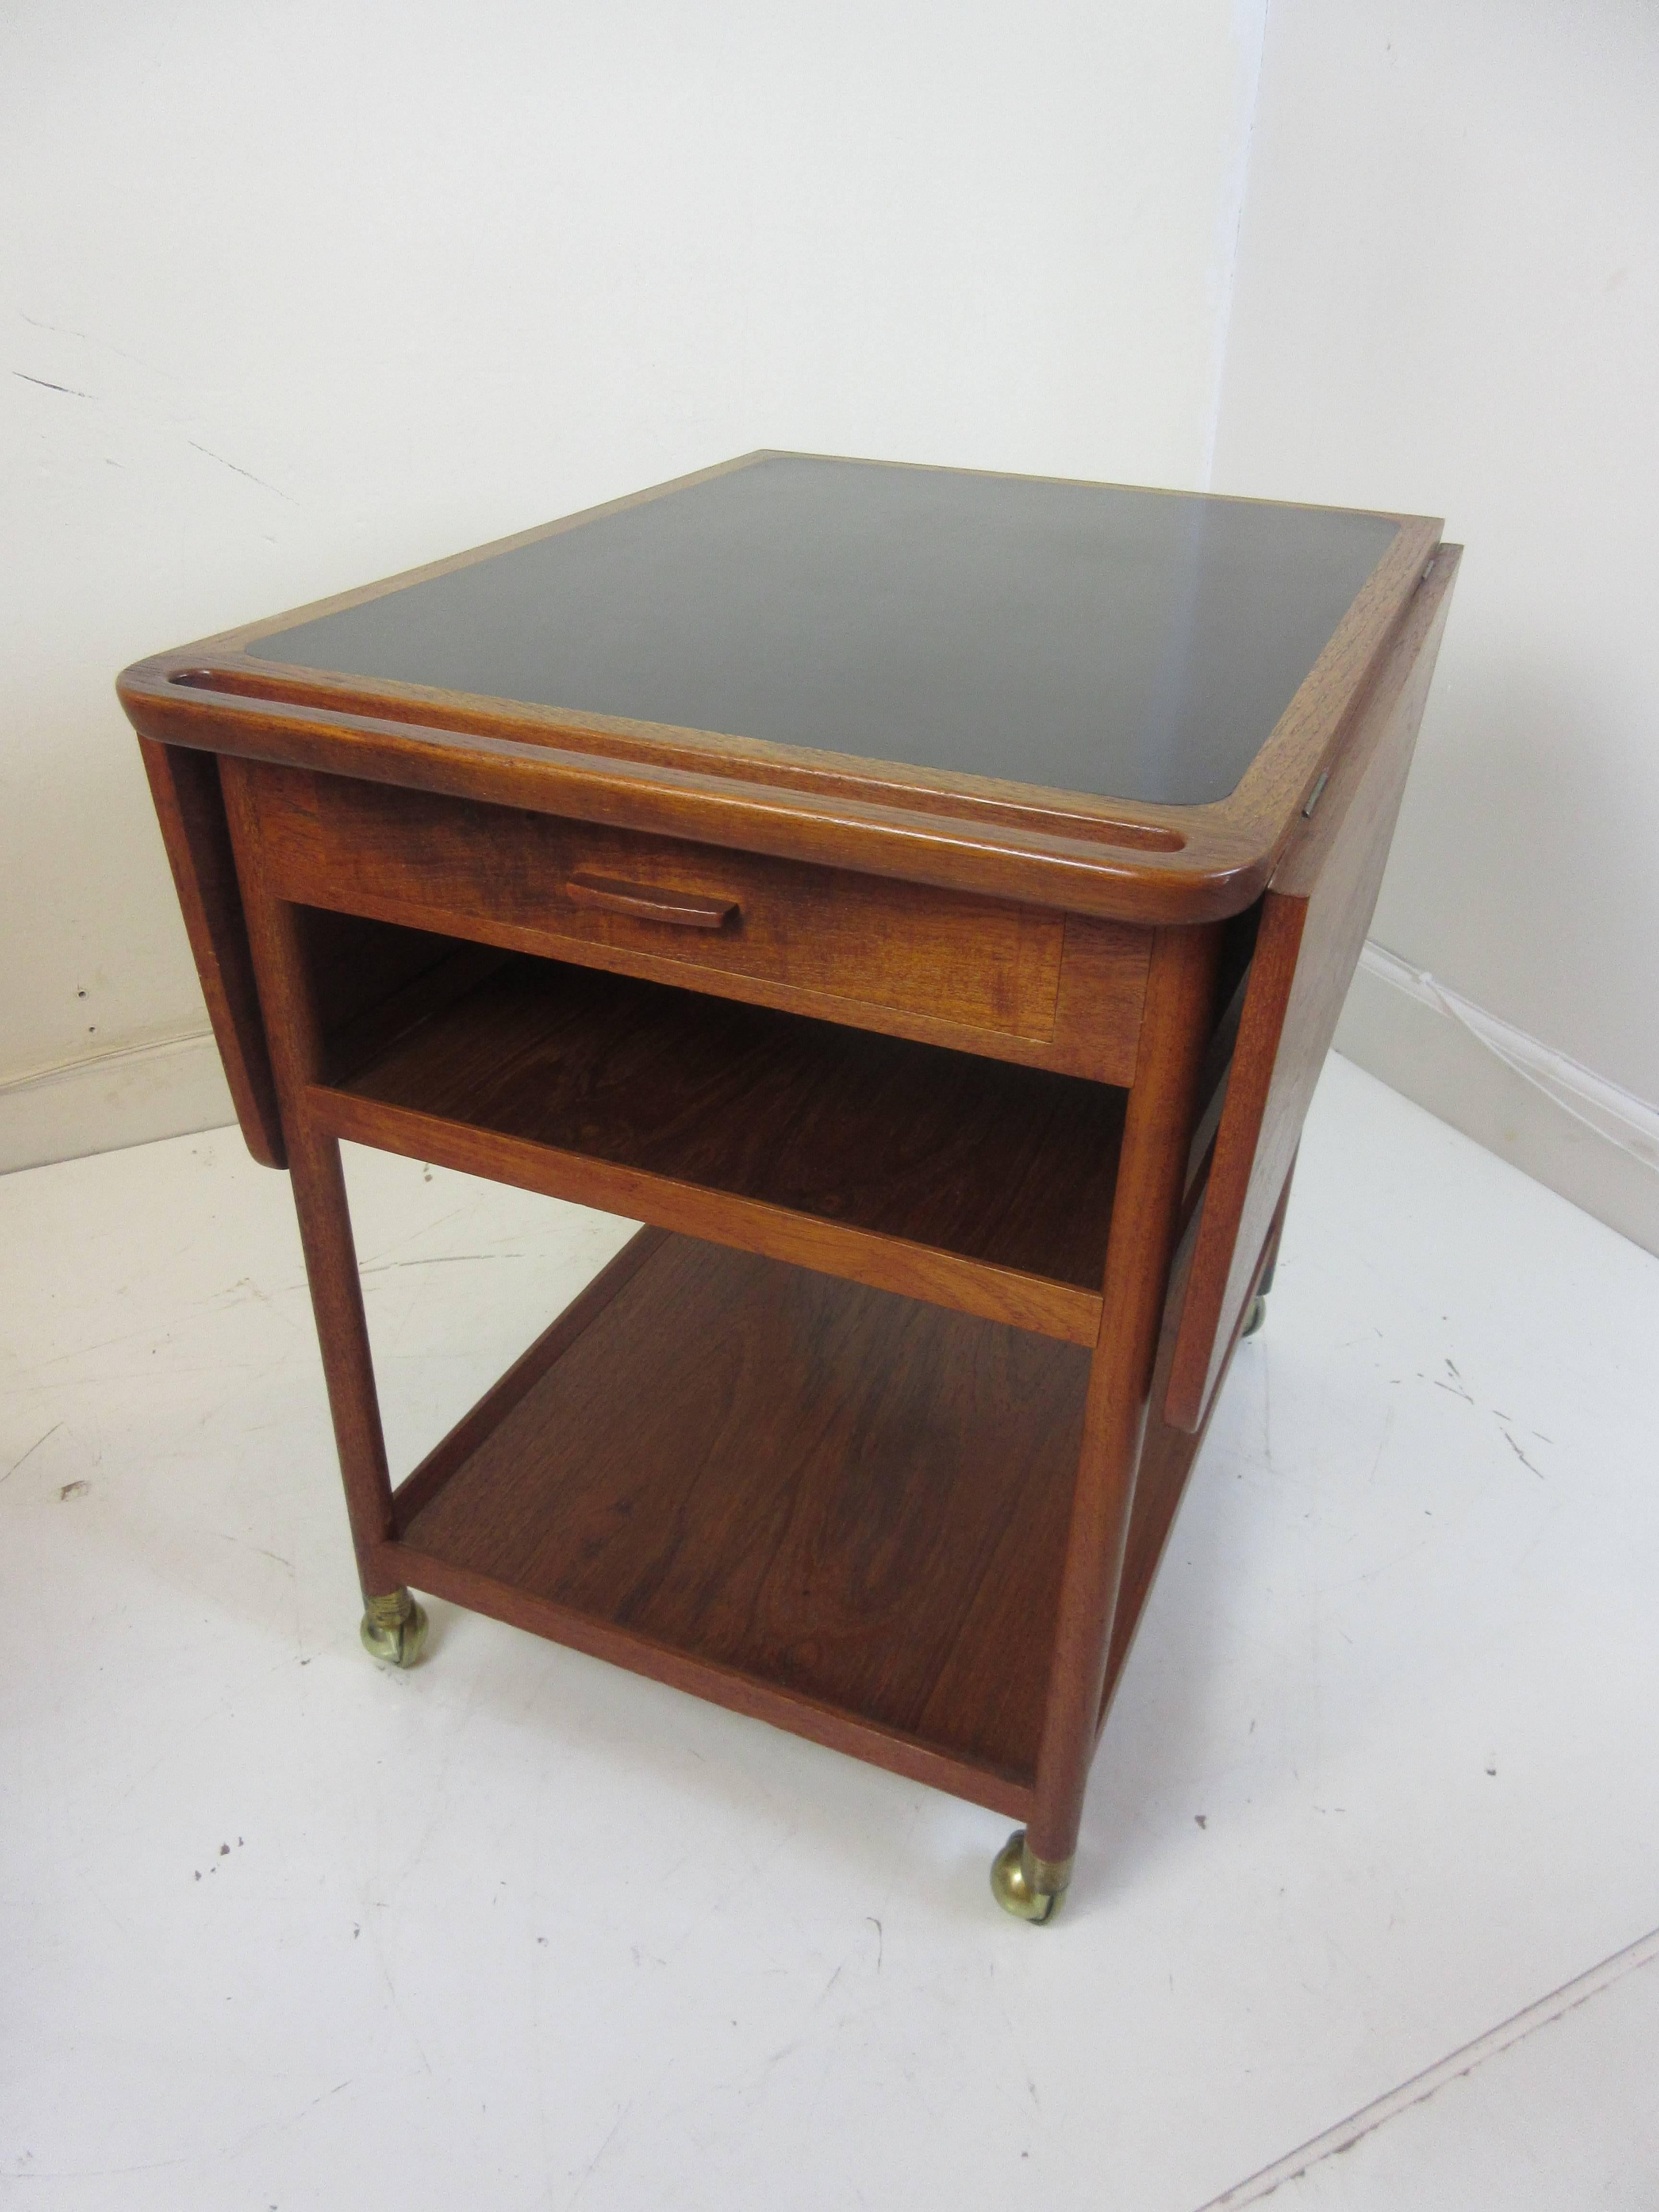 Ludvig Pontoppidan teak tea cart with two 11 inch drop leaves, one drawer and three shelves with the top shelve covered in black laminate. Bottom of drawer has the original makers decal.